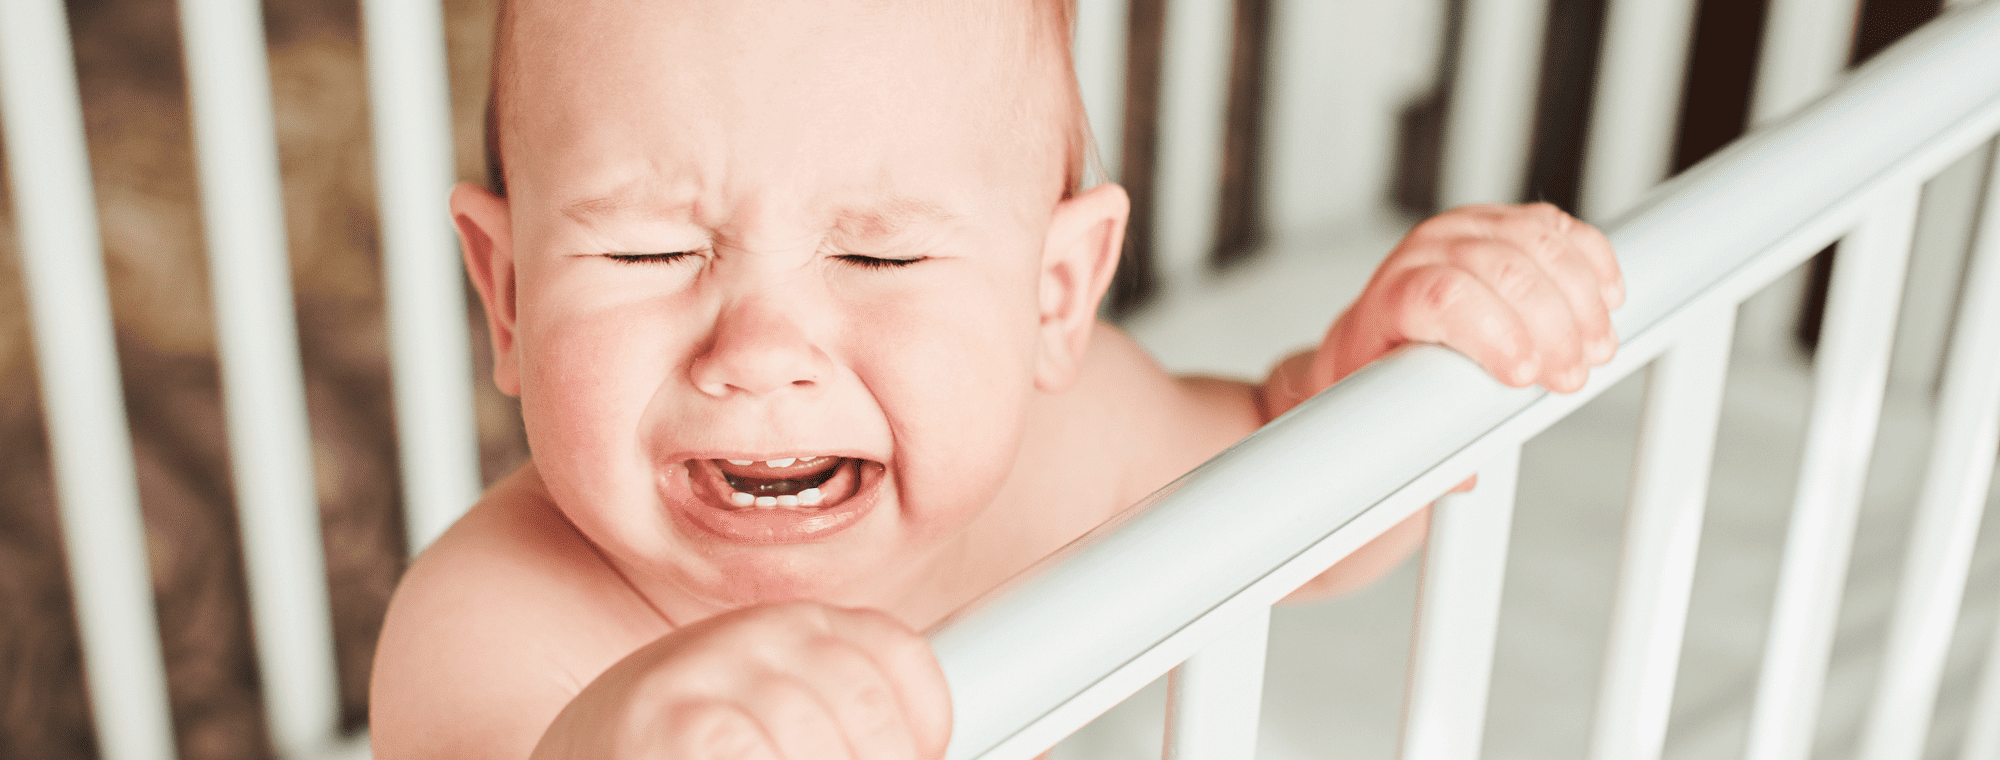 Why Won’t My Baby Stop Crying?